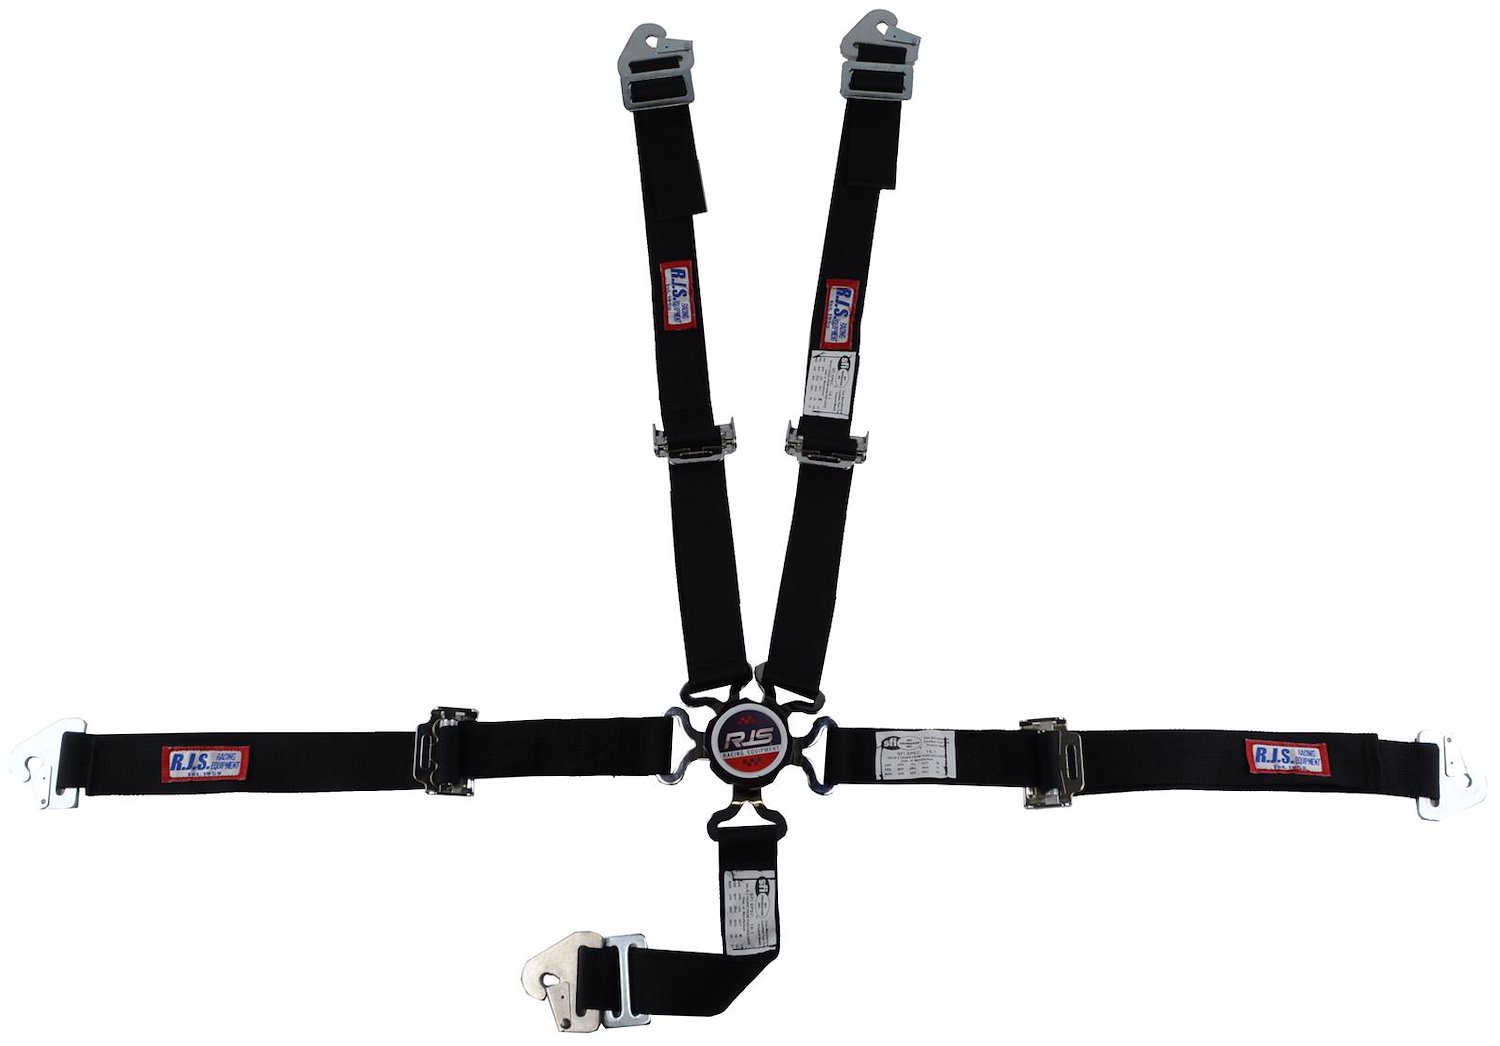 SFI 16.1 CAM-LOCK HARNESS 2 PULL UP Lap Belt 2 Shoulder Harness Individual ROLL BAR Mount 2 DOUBLE Sub ALL WRAP ENDS PURPLE